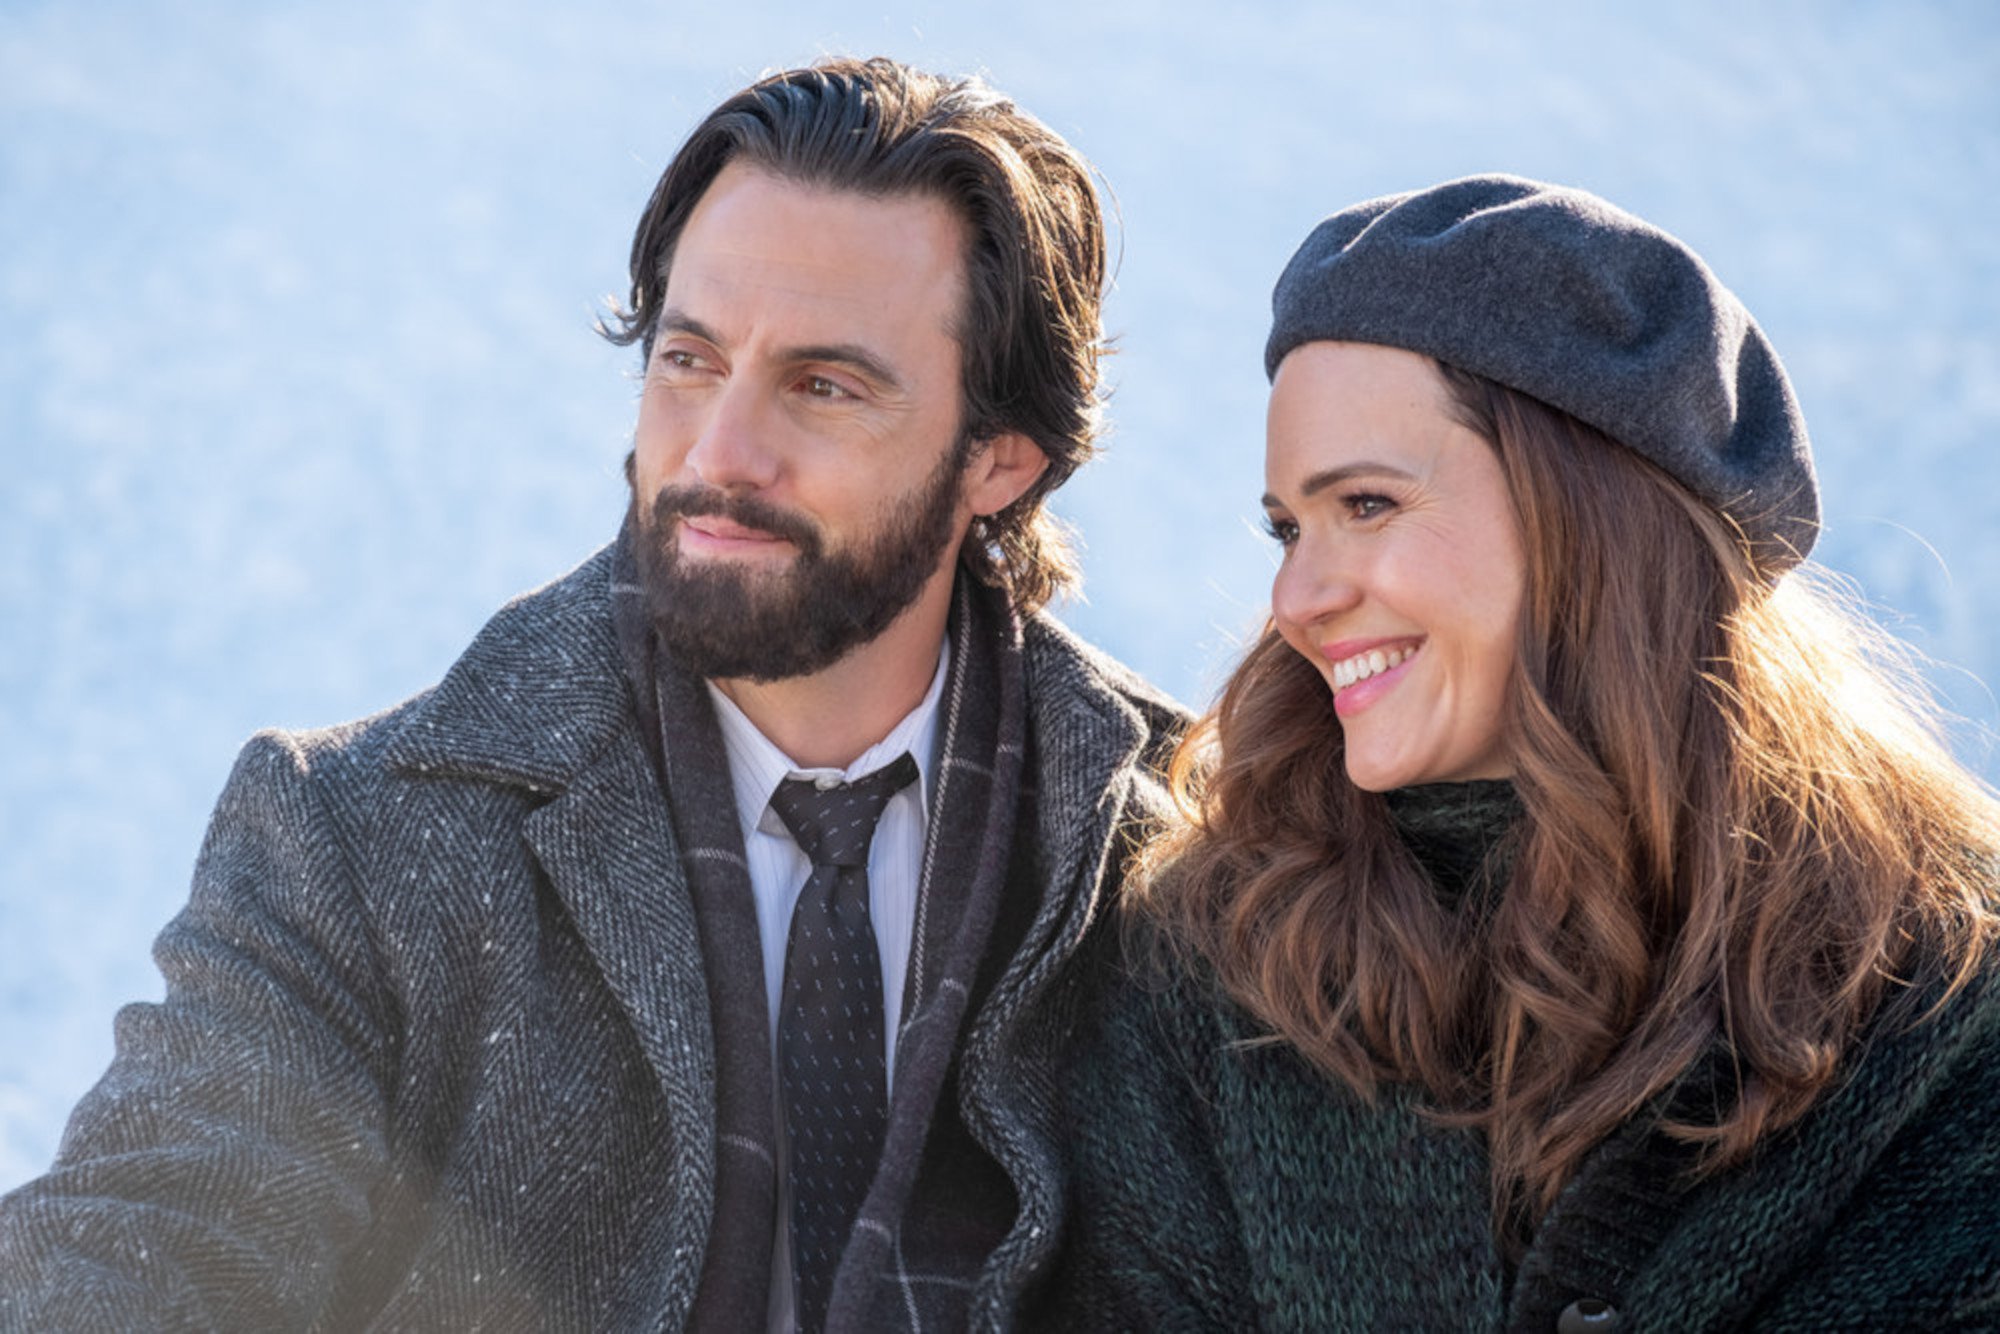 Milo Ventimiglia and Mandy Moore as Jack and Rebecca Pearson in 'This Is Us' Season 6. The two are sitting in the snow, wearing coats. They're smiling and looking at something off-screen.